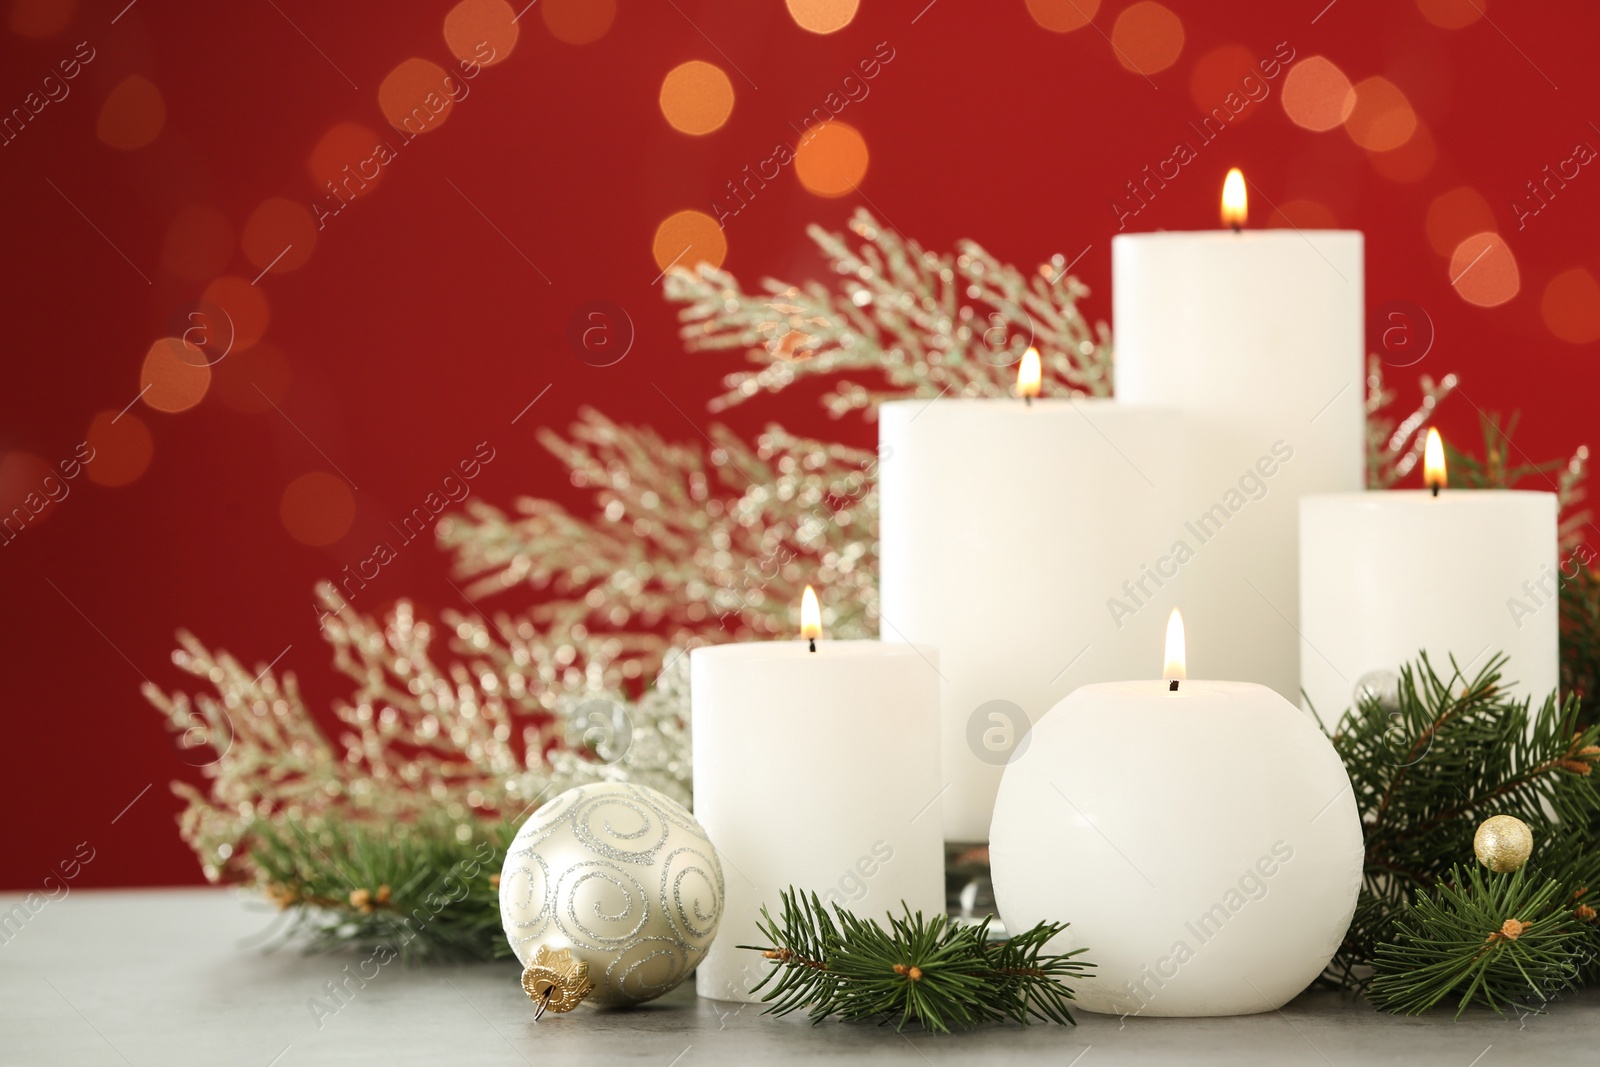 Photo of Burning white candles and Christmas decor on table against red background with bokeh effect